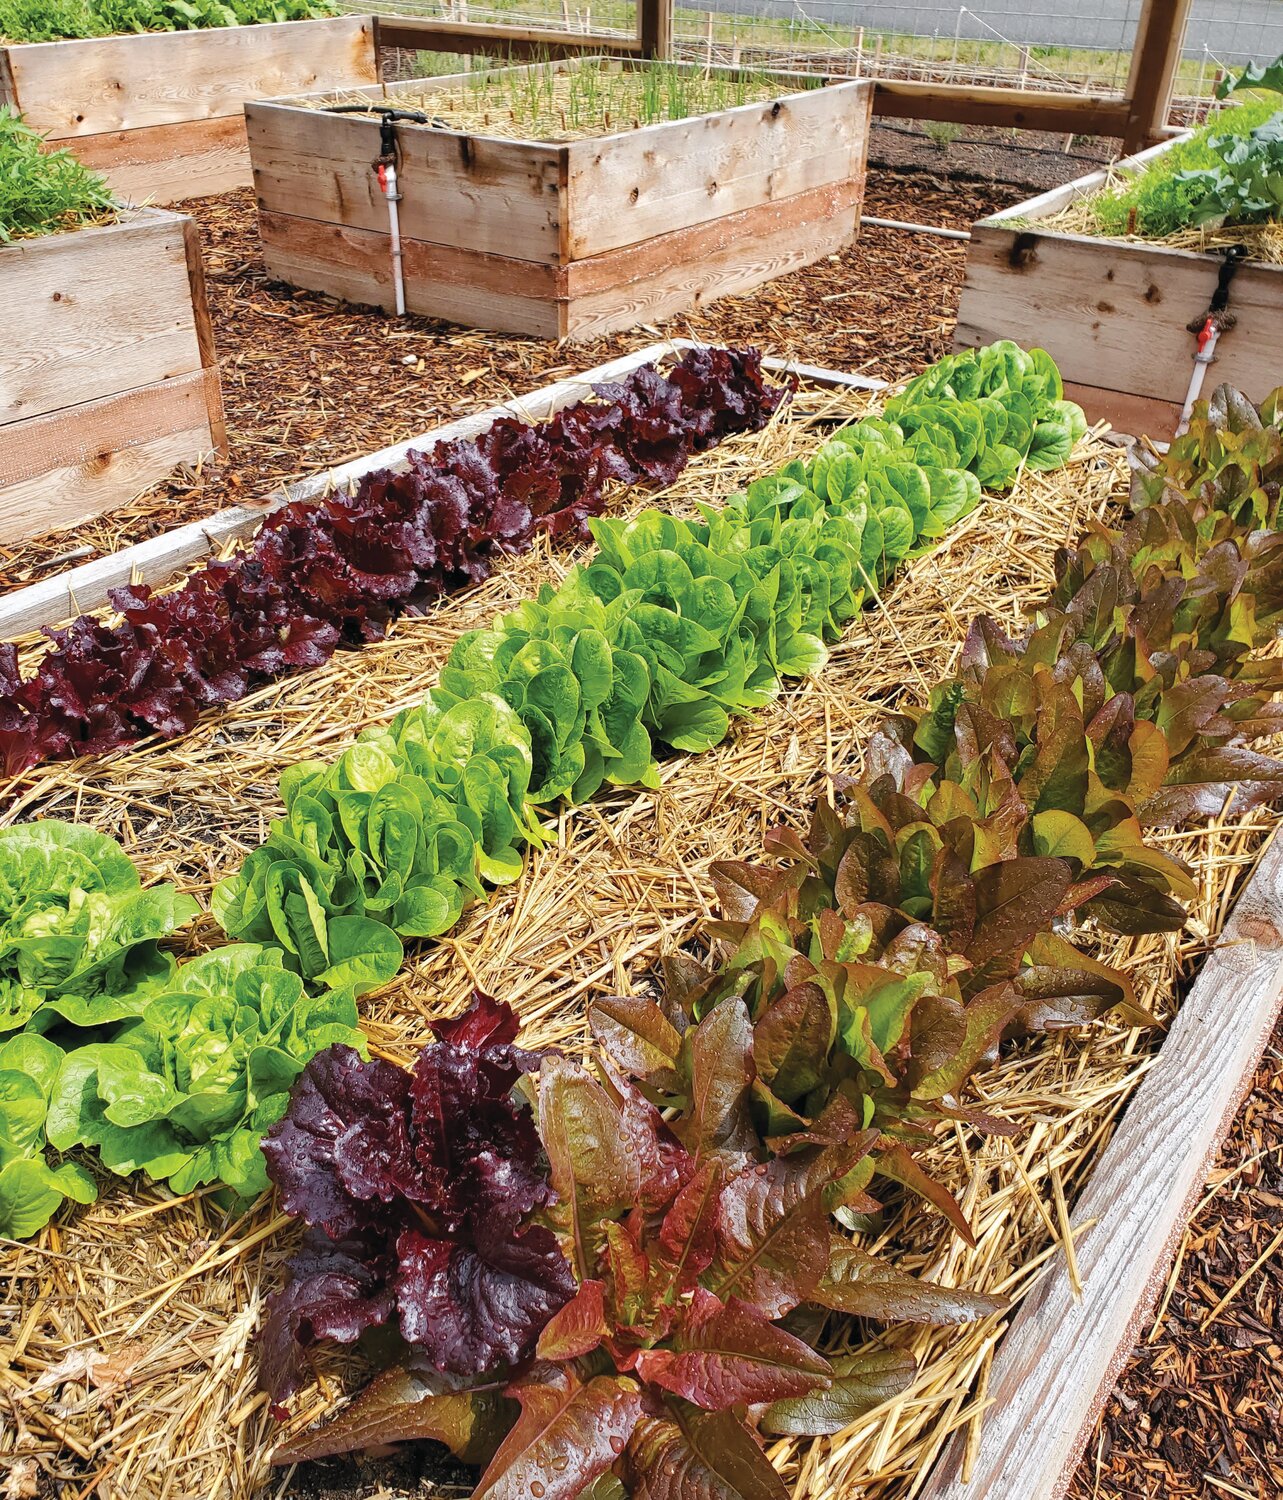 Elevated beds form an “age in place” veggie garden. Beds are 4-foot-by-6-foot, with hardware cloth at the bottom to deter resident moles. Aisles are 48 inches wide to allow ample space for garden equipment, wheelchairs, or mobility devices that might be needed in the future.